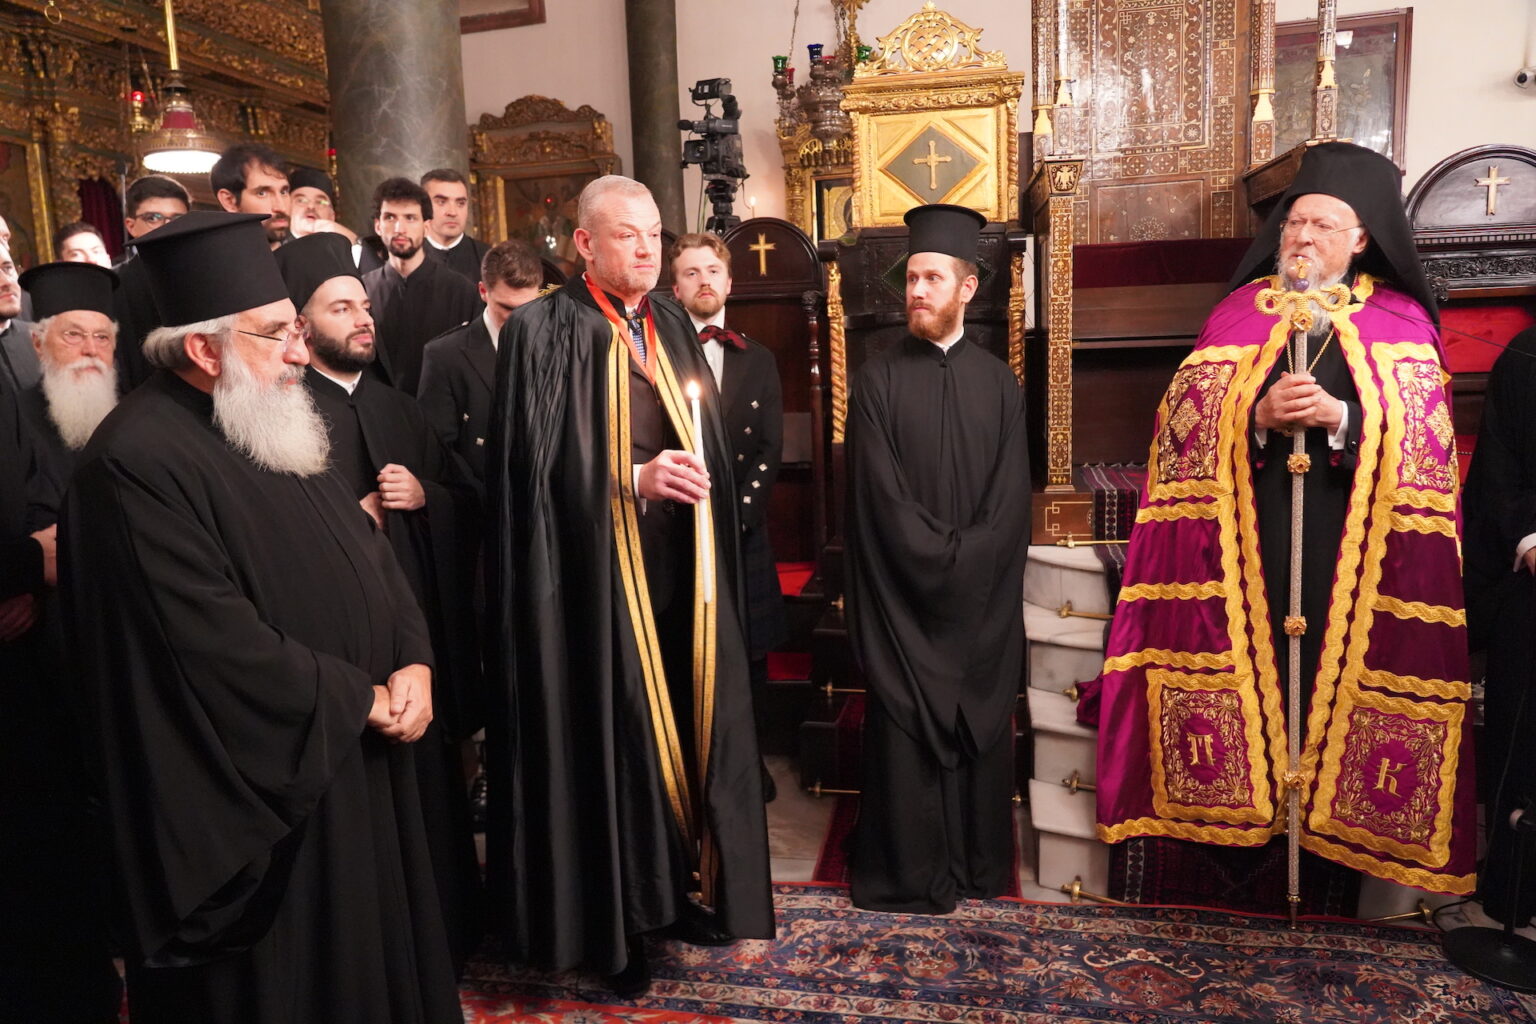 Ecumenical Patriarch Bartholomew: “The convergence of our Churches contributes to dialogue and peace”